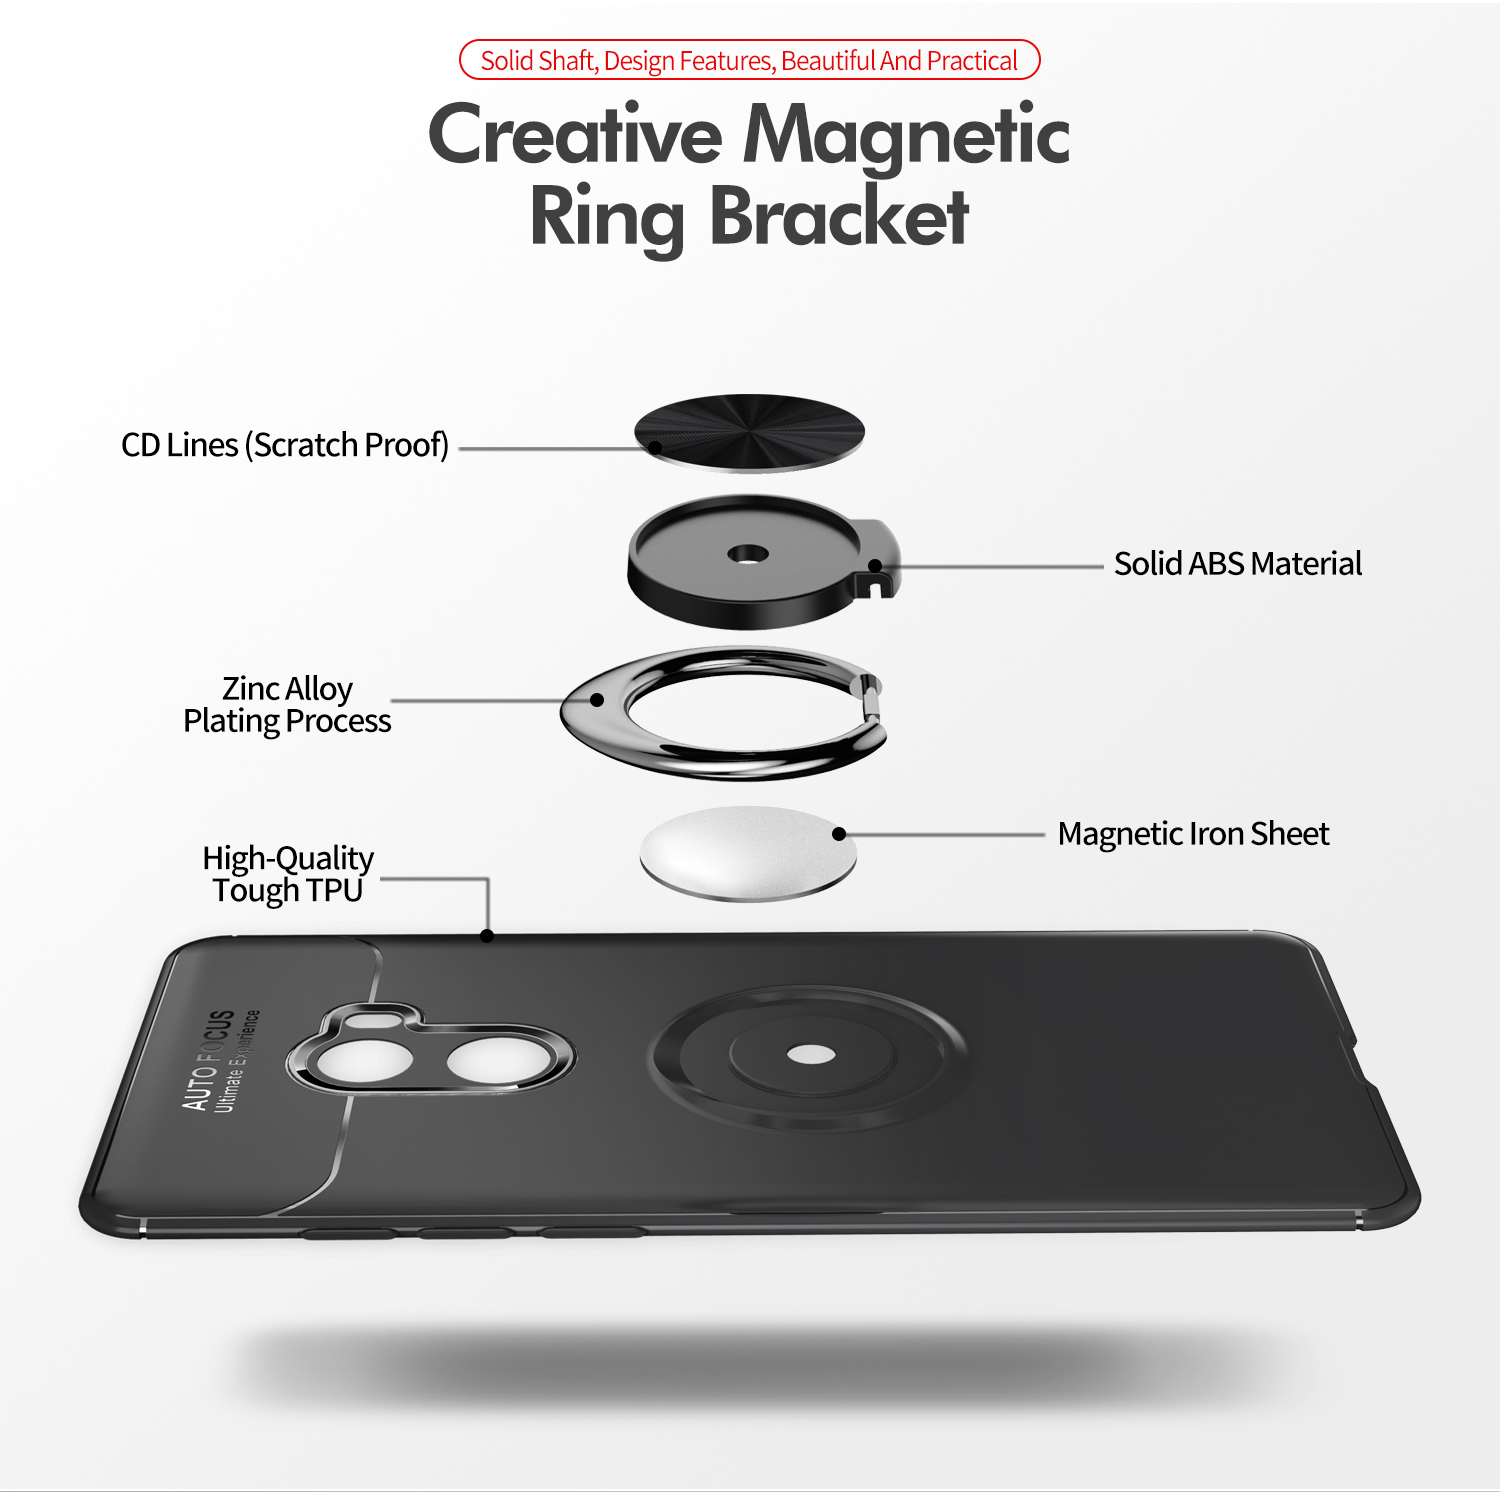 Bakeey-360deg-Adjustable-Metal-Ring-Kickstand-Magnetic-PC-Protective-Case-for-Xiaomi-Mi-MIX-2-Non-or-1300924-4